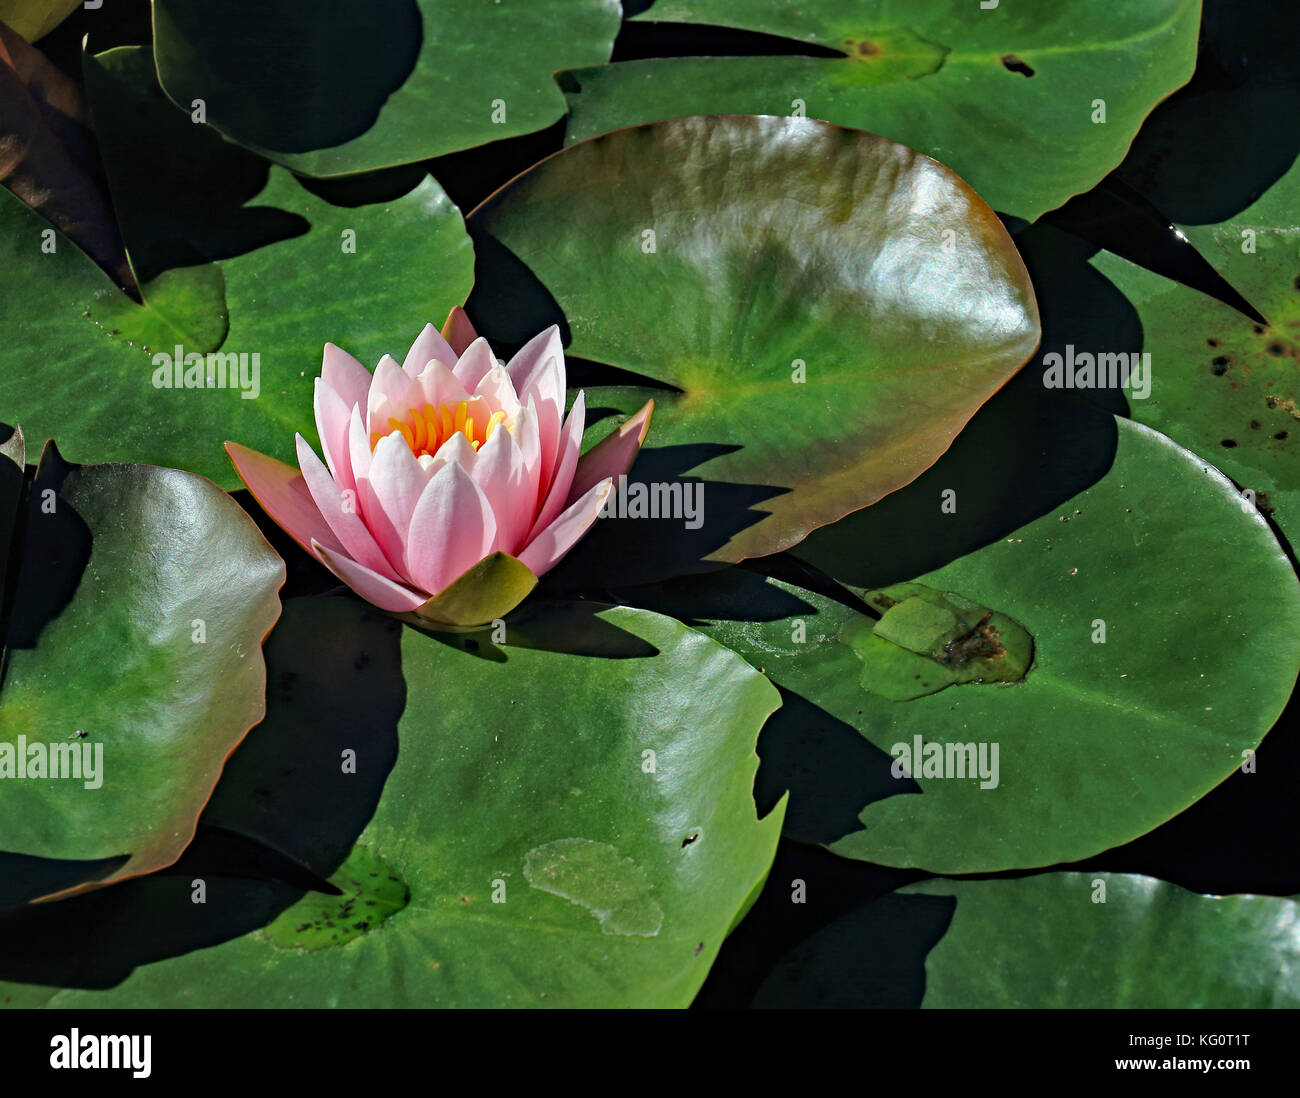 it is very hard to miss this strikingly pink single water lily blossom laying among the numerous bright green lily pad leaves Stock Photo